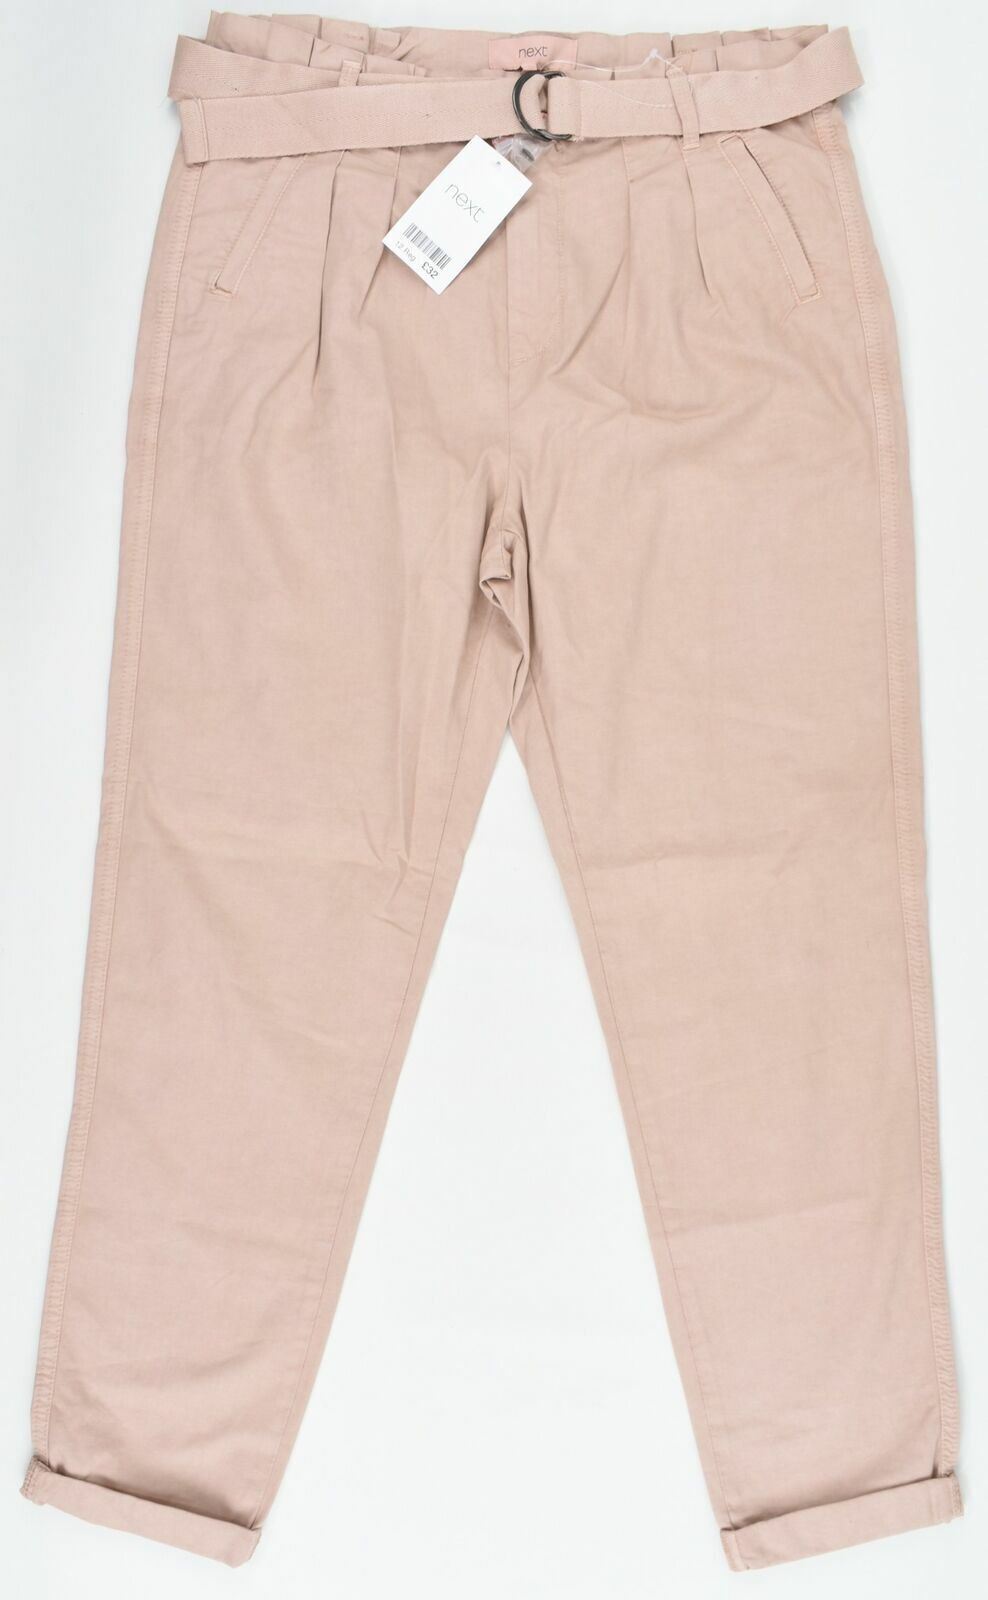 NEXT Women's Light Brown Relaxed Fit Trousers- UK 12R